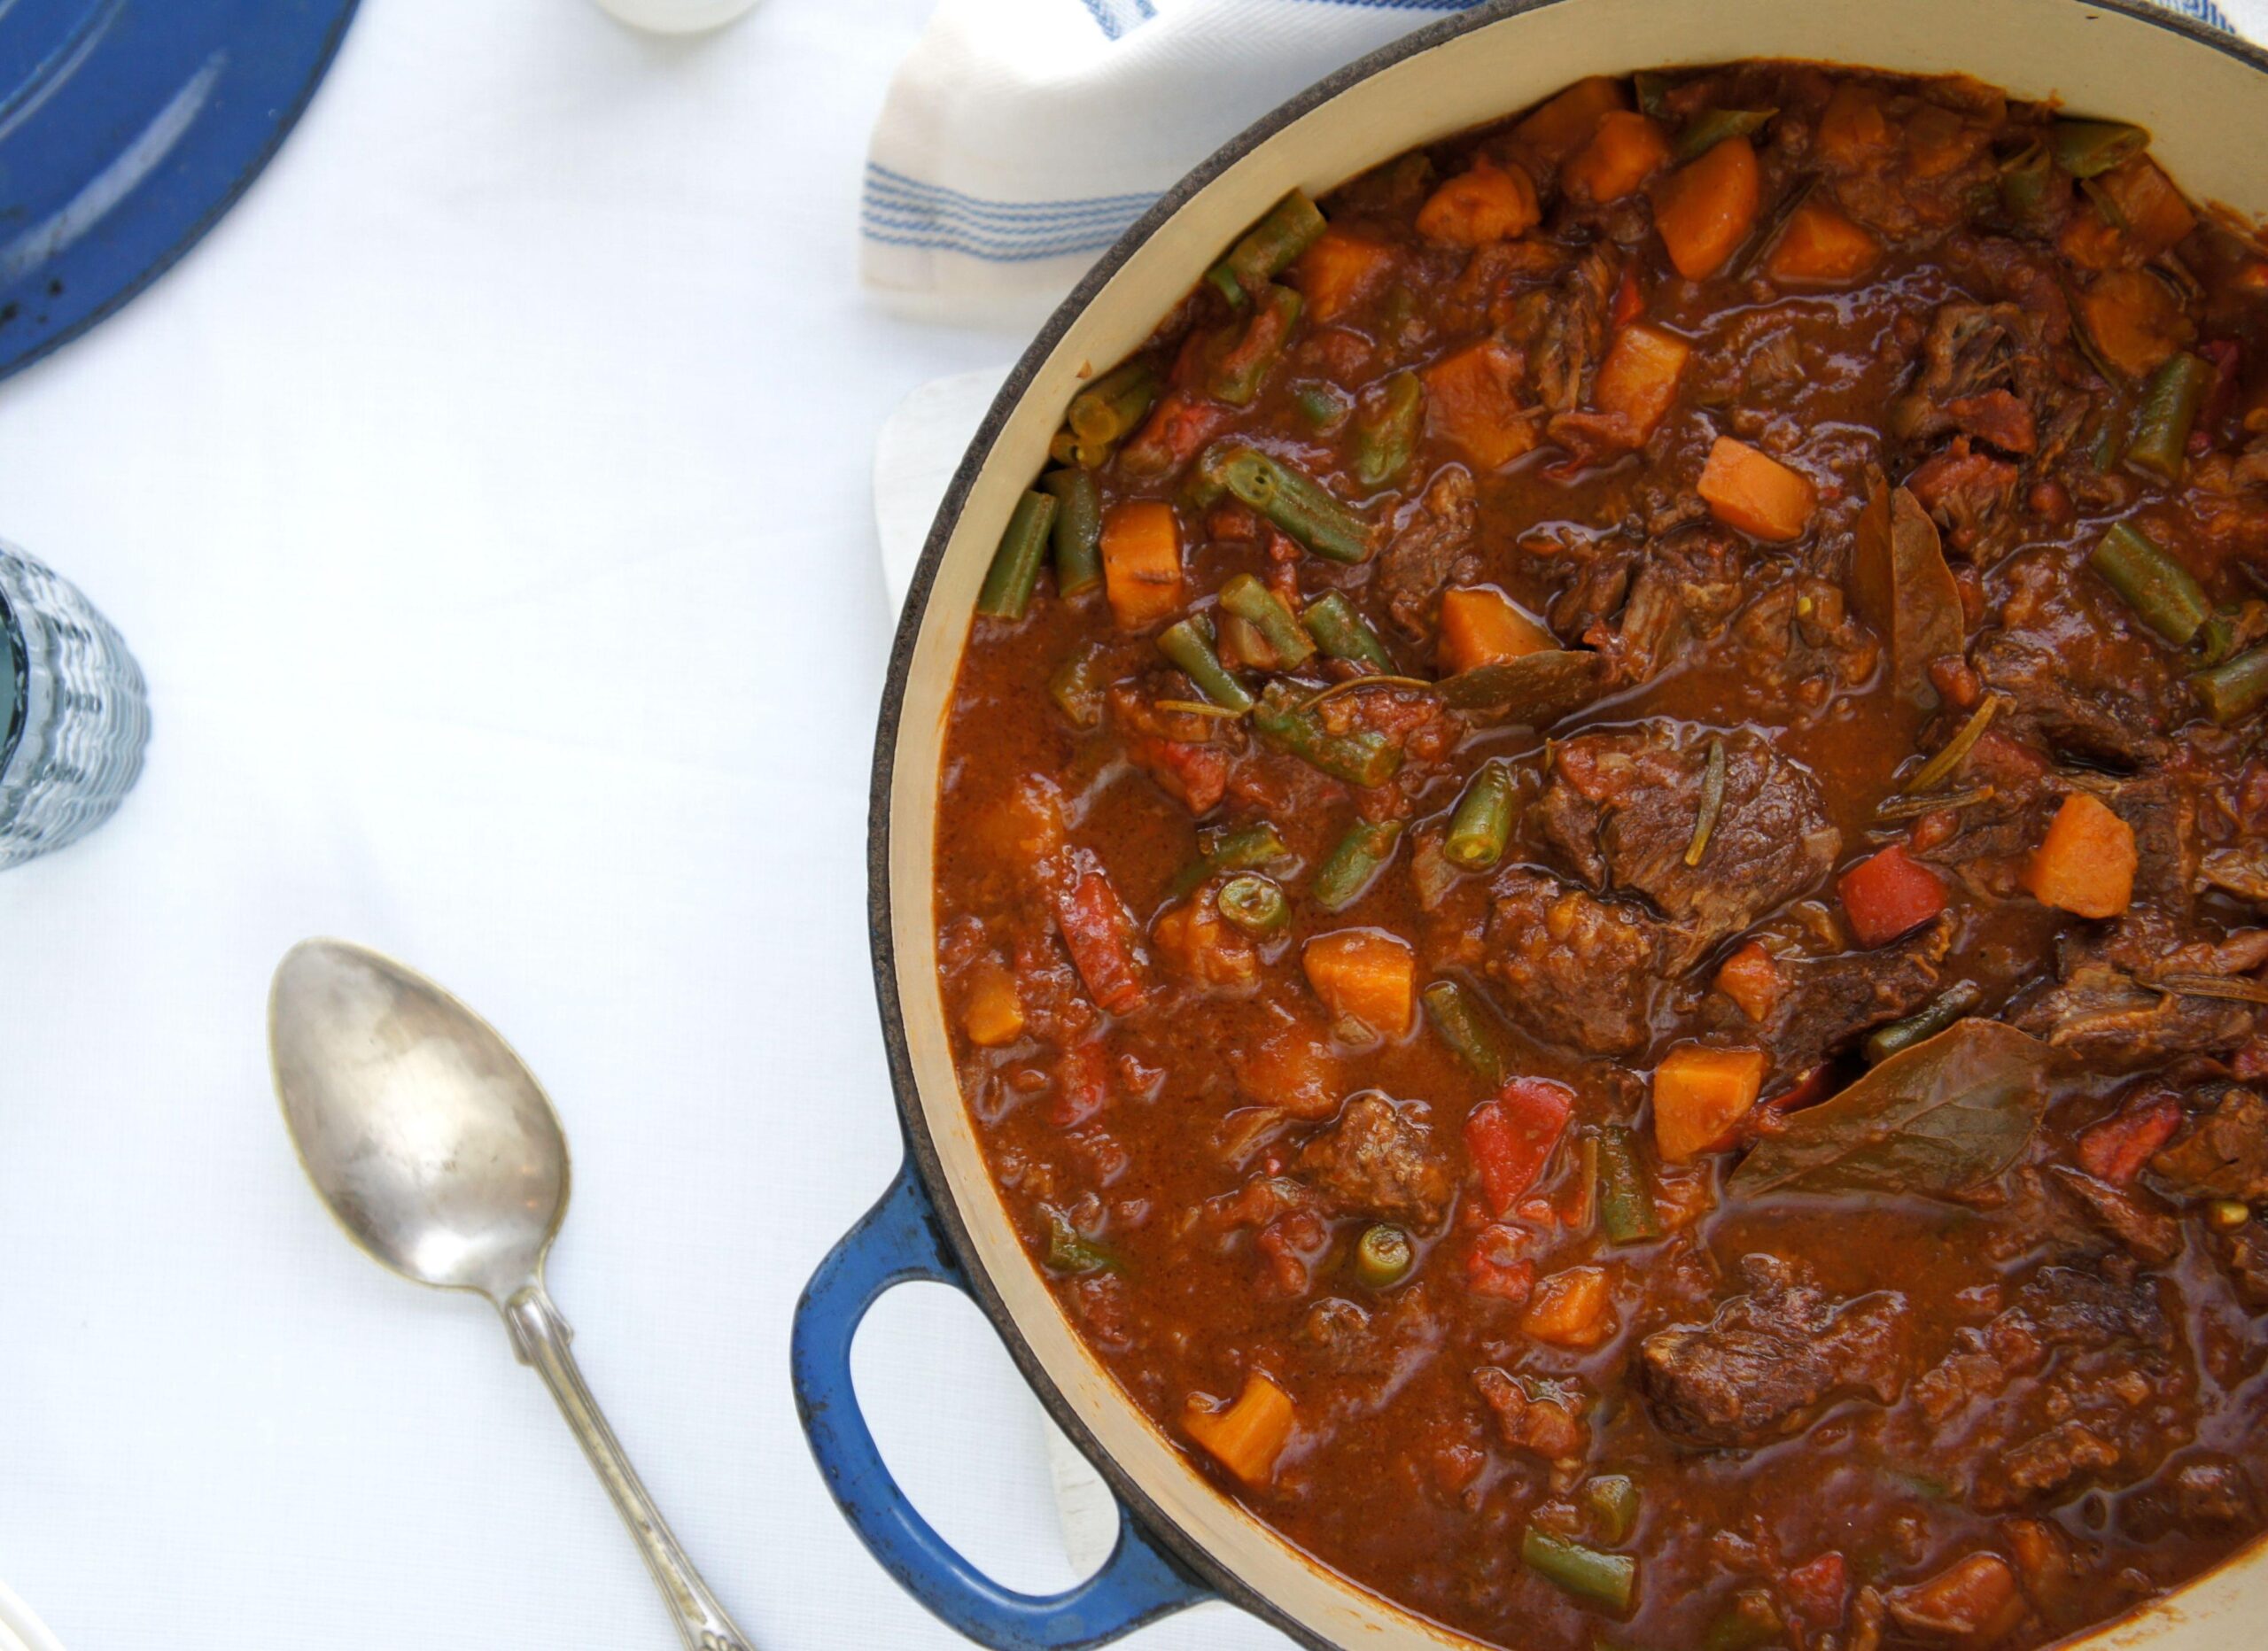  The rich aroma of simmering beef and red wine will fill your kitchen with warmth and comfort.